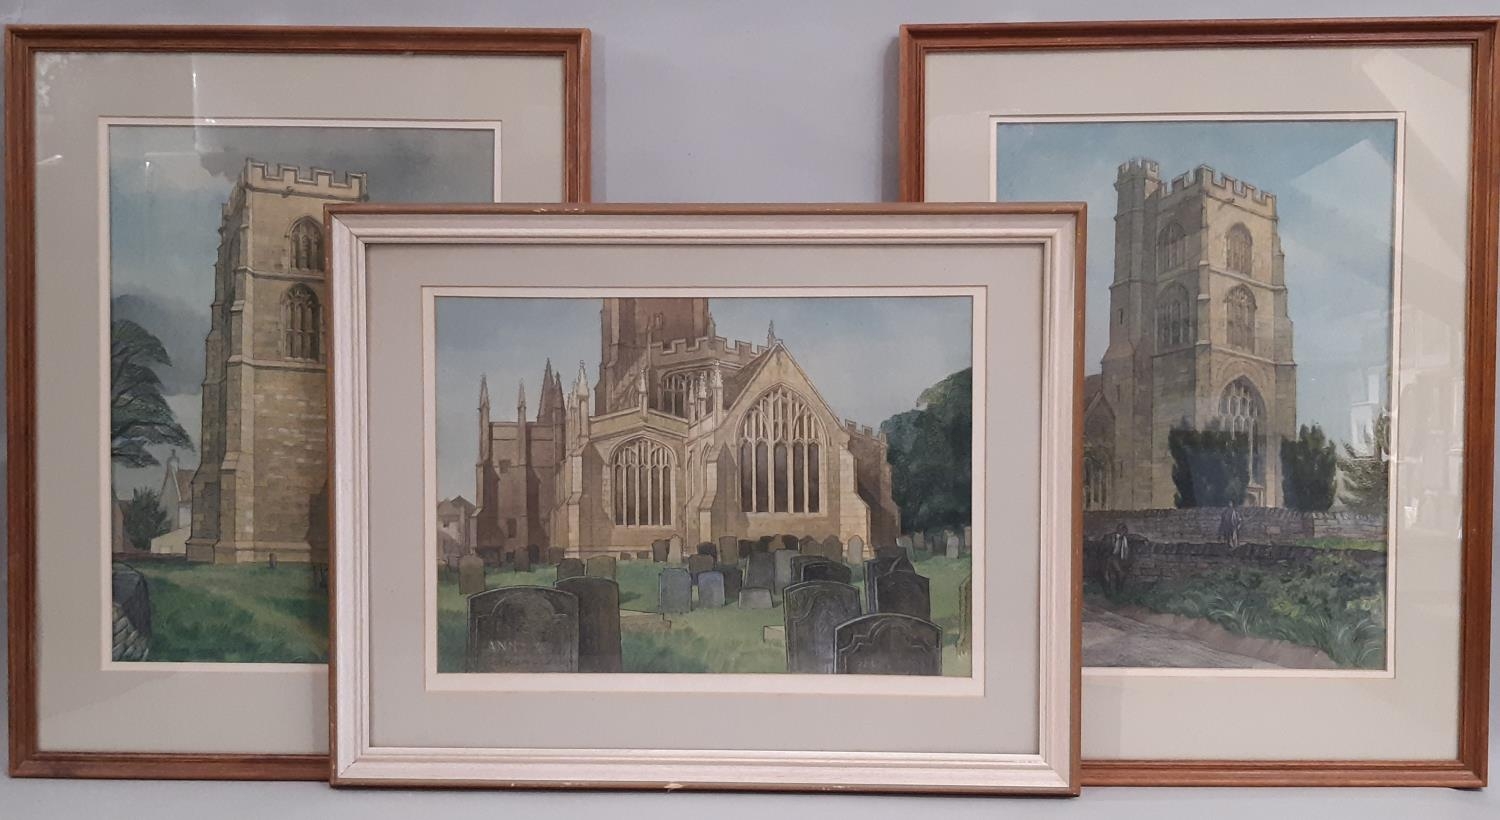 William Suddaby (20th/21st century) - Three paintings of churches, pencil, watercolour and pastel on